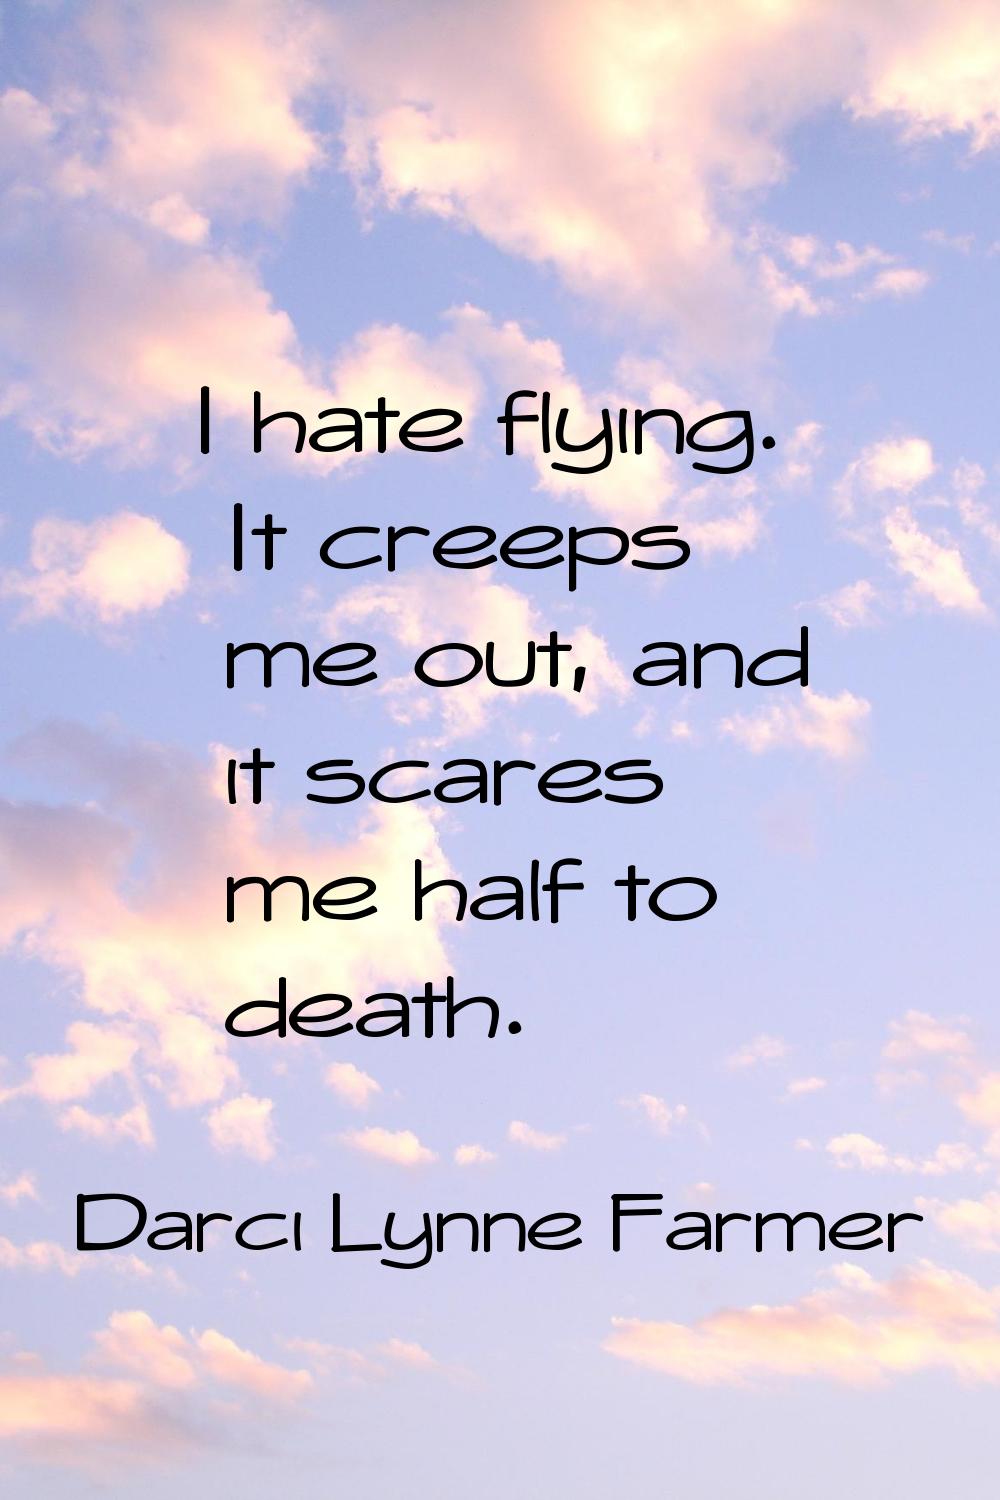 I hate flying. It creeps me out, and it scares me half to death.